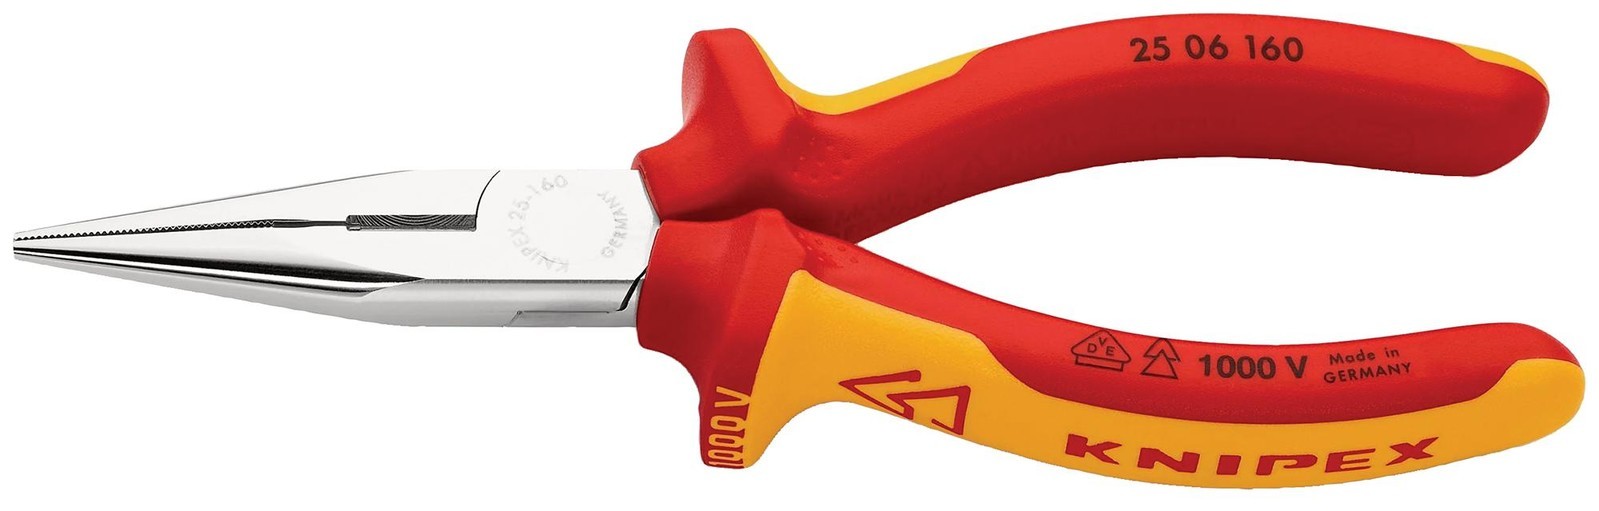 Knipex 25 06 160 Plier, Flat Round Nose